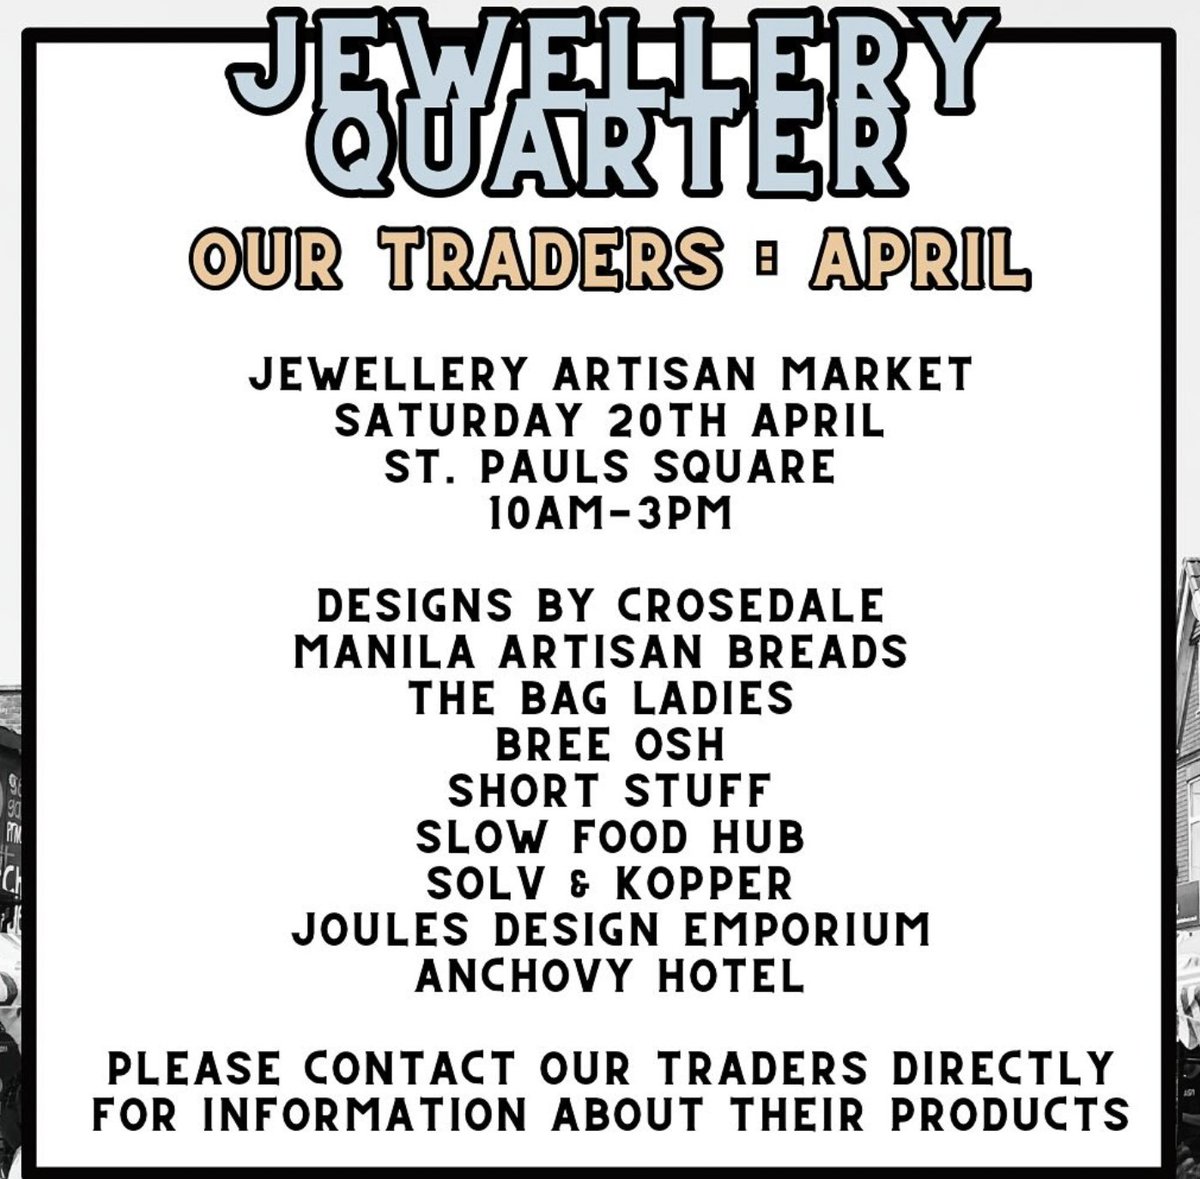 TODAY Saturday 20 April in #StPaulsSquare the new #JewelleryQuarter #ArtisanMarket from 10am - 3pm. The second monthly arts and produce market featuring independent makers, artists and producers! #JQLife #JQEvent #JQArtisanMarket #JQFood @StPaulsChurchJQ